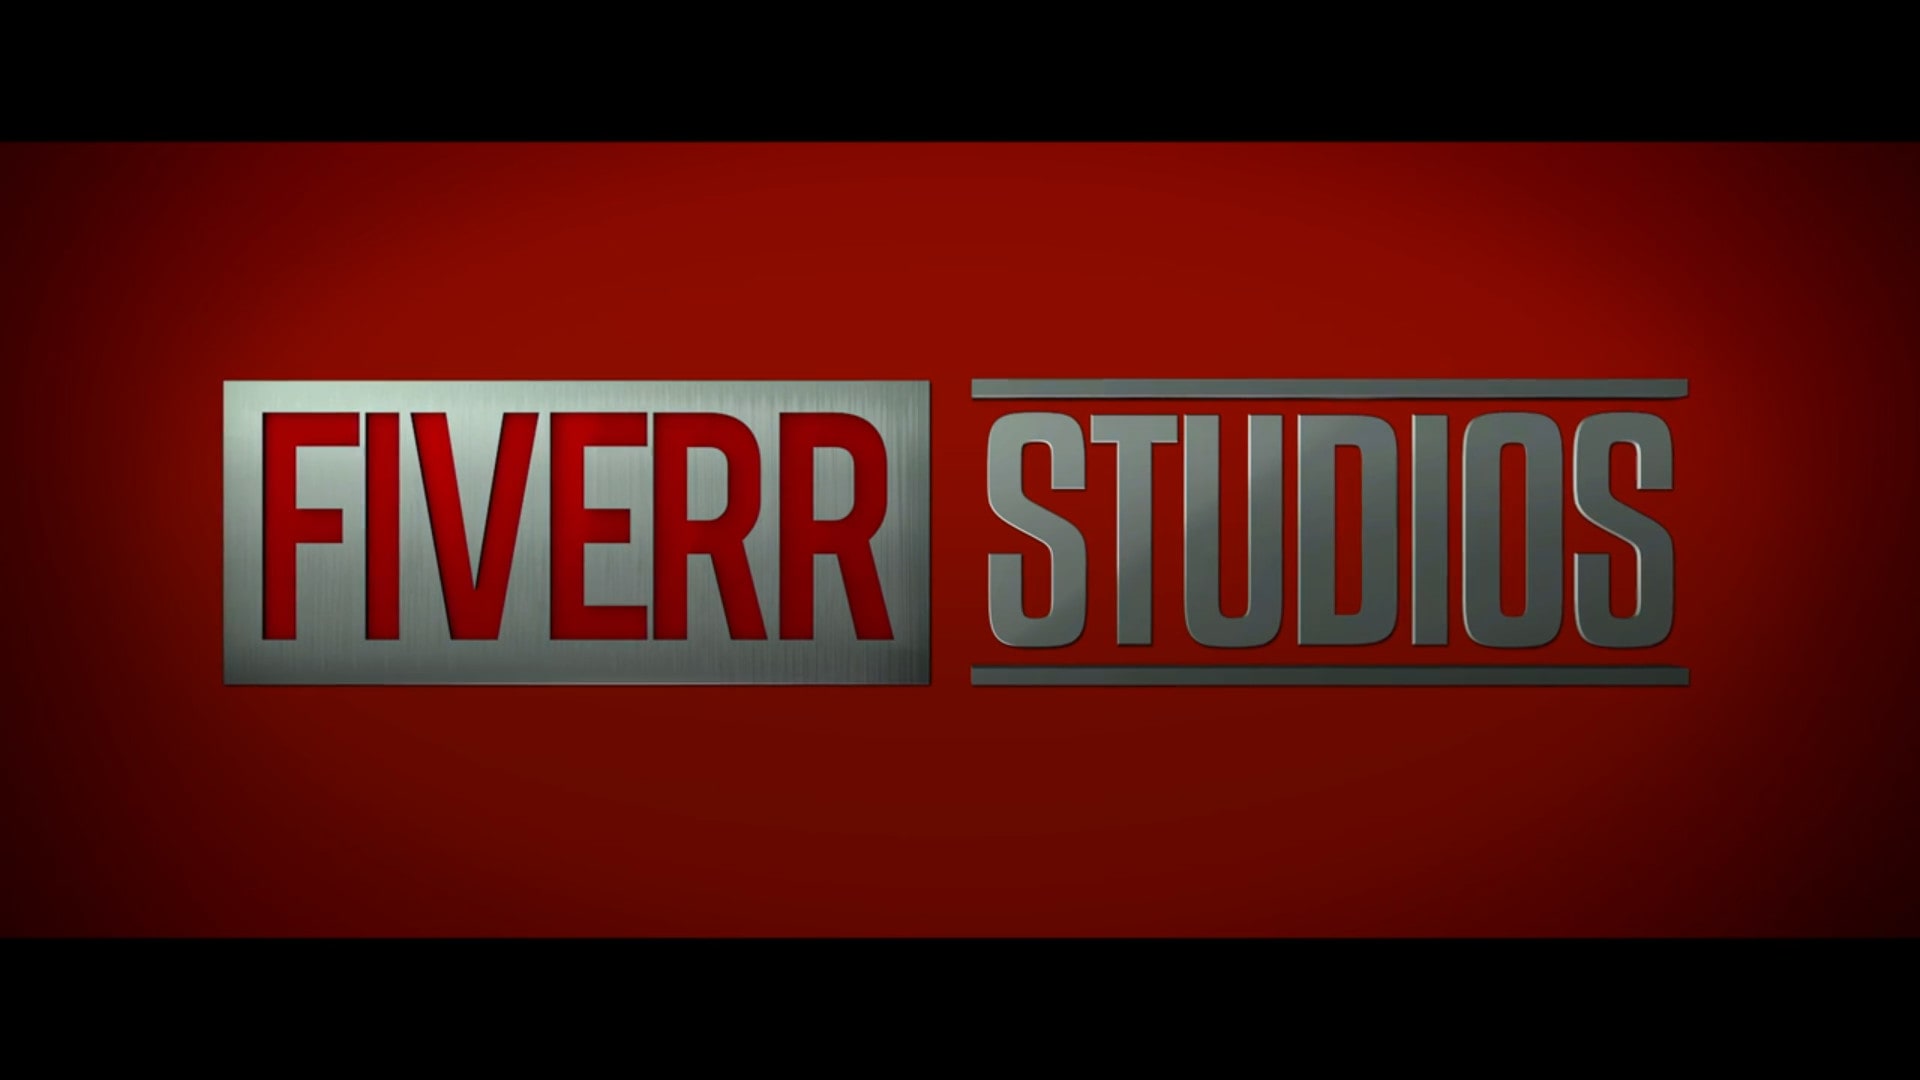 Make you a marvel studios style intro by Anantmantri | Fiverr